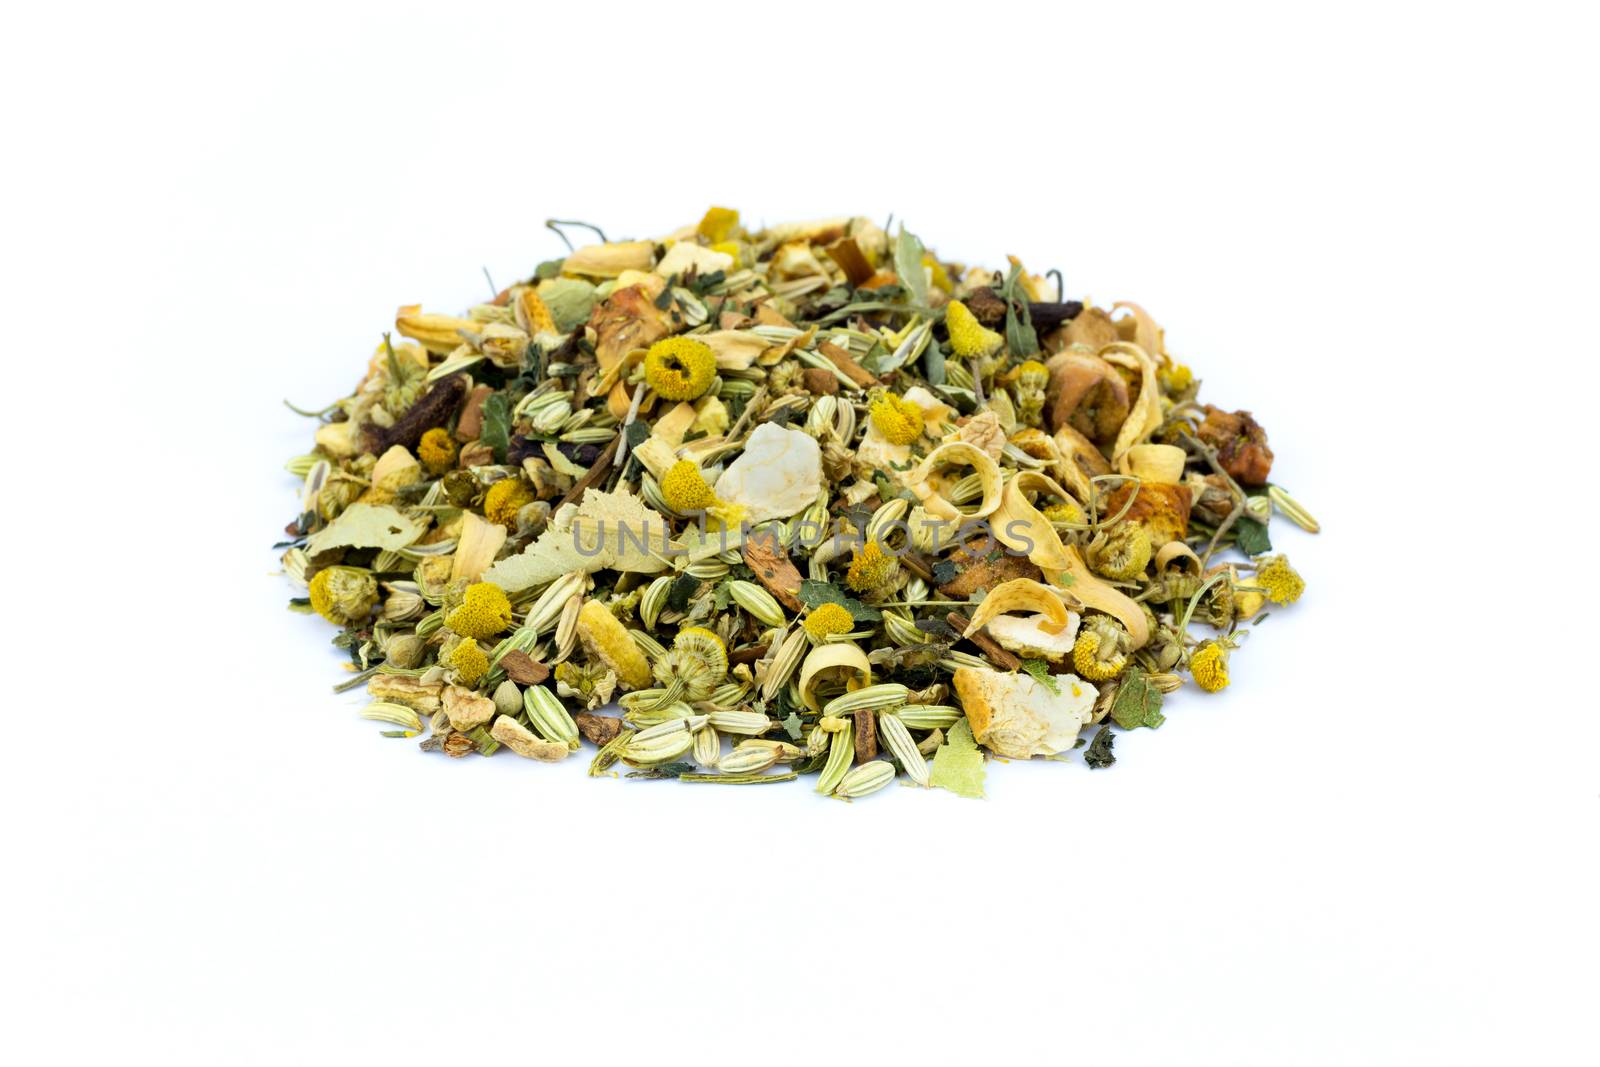 Heap of loose mixture of herbal tea on white background by BenSchonewille